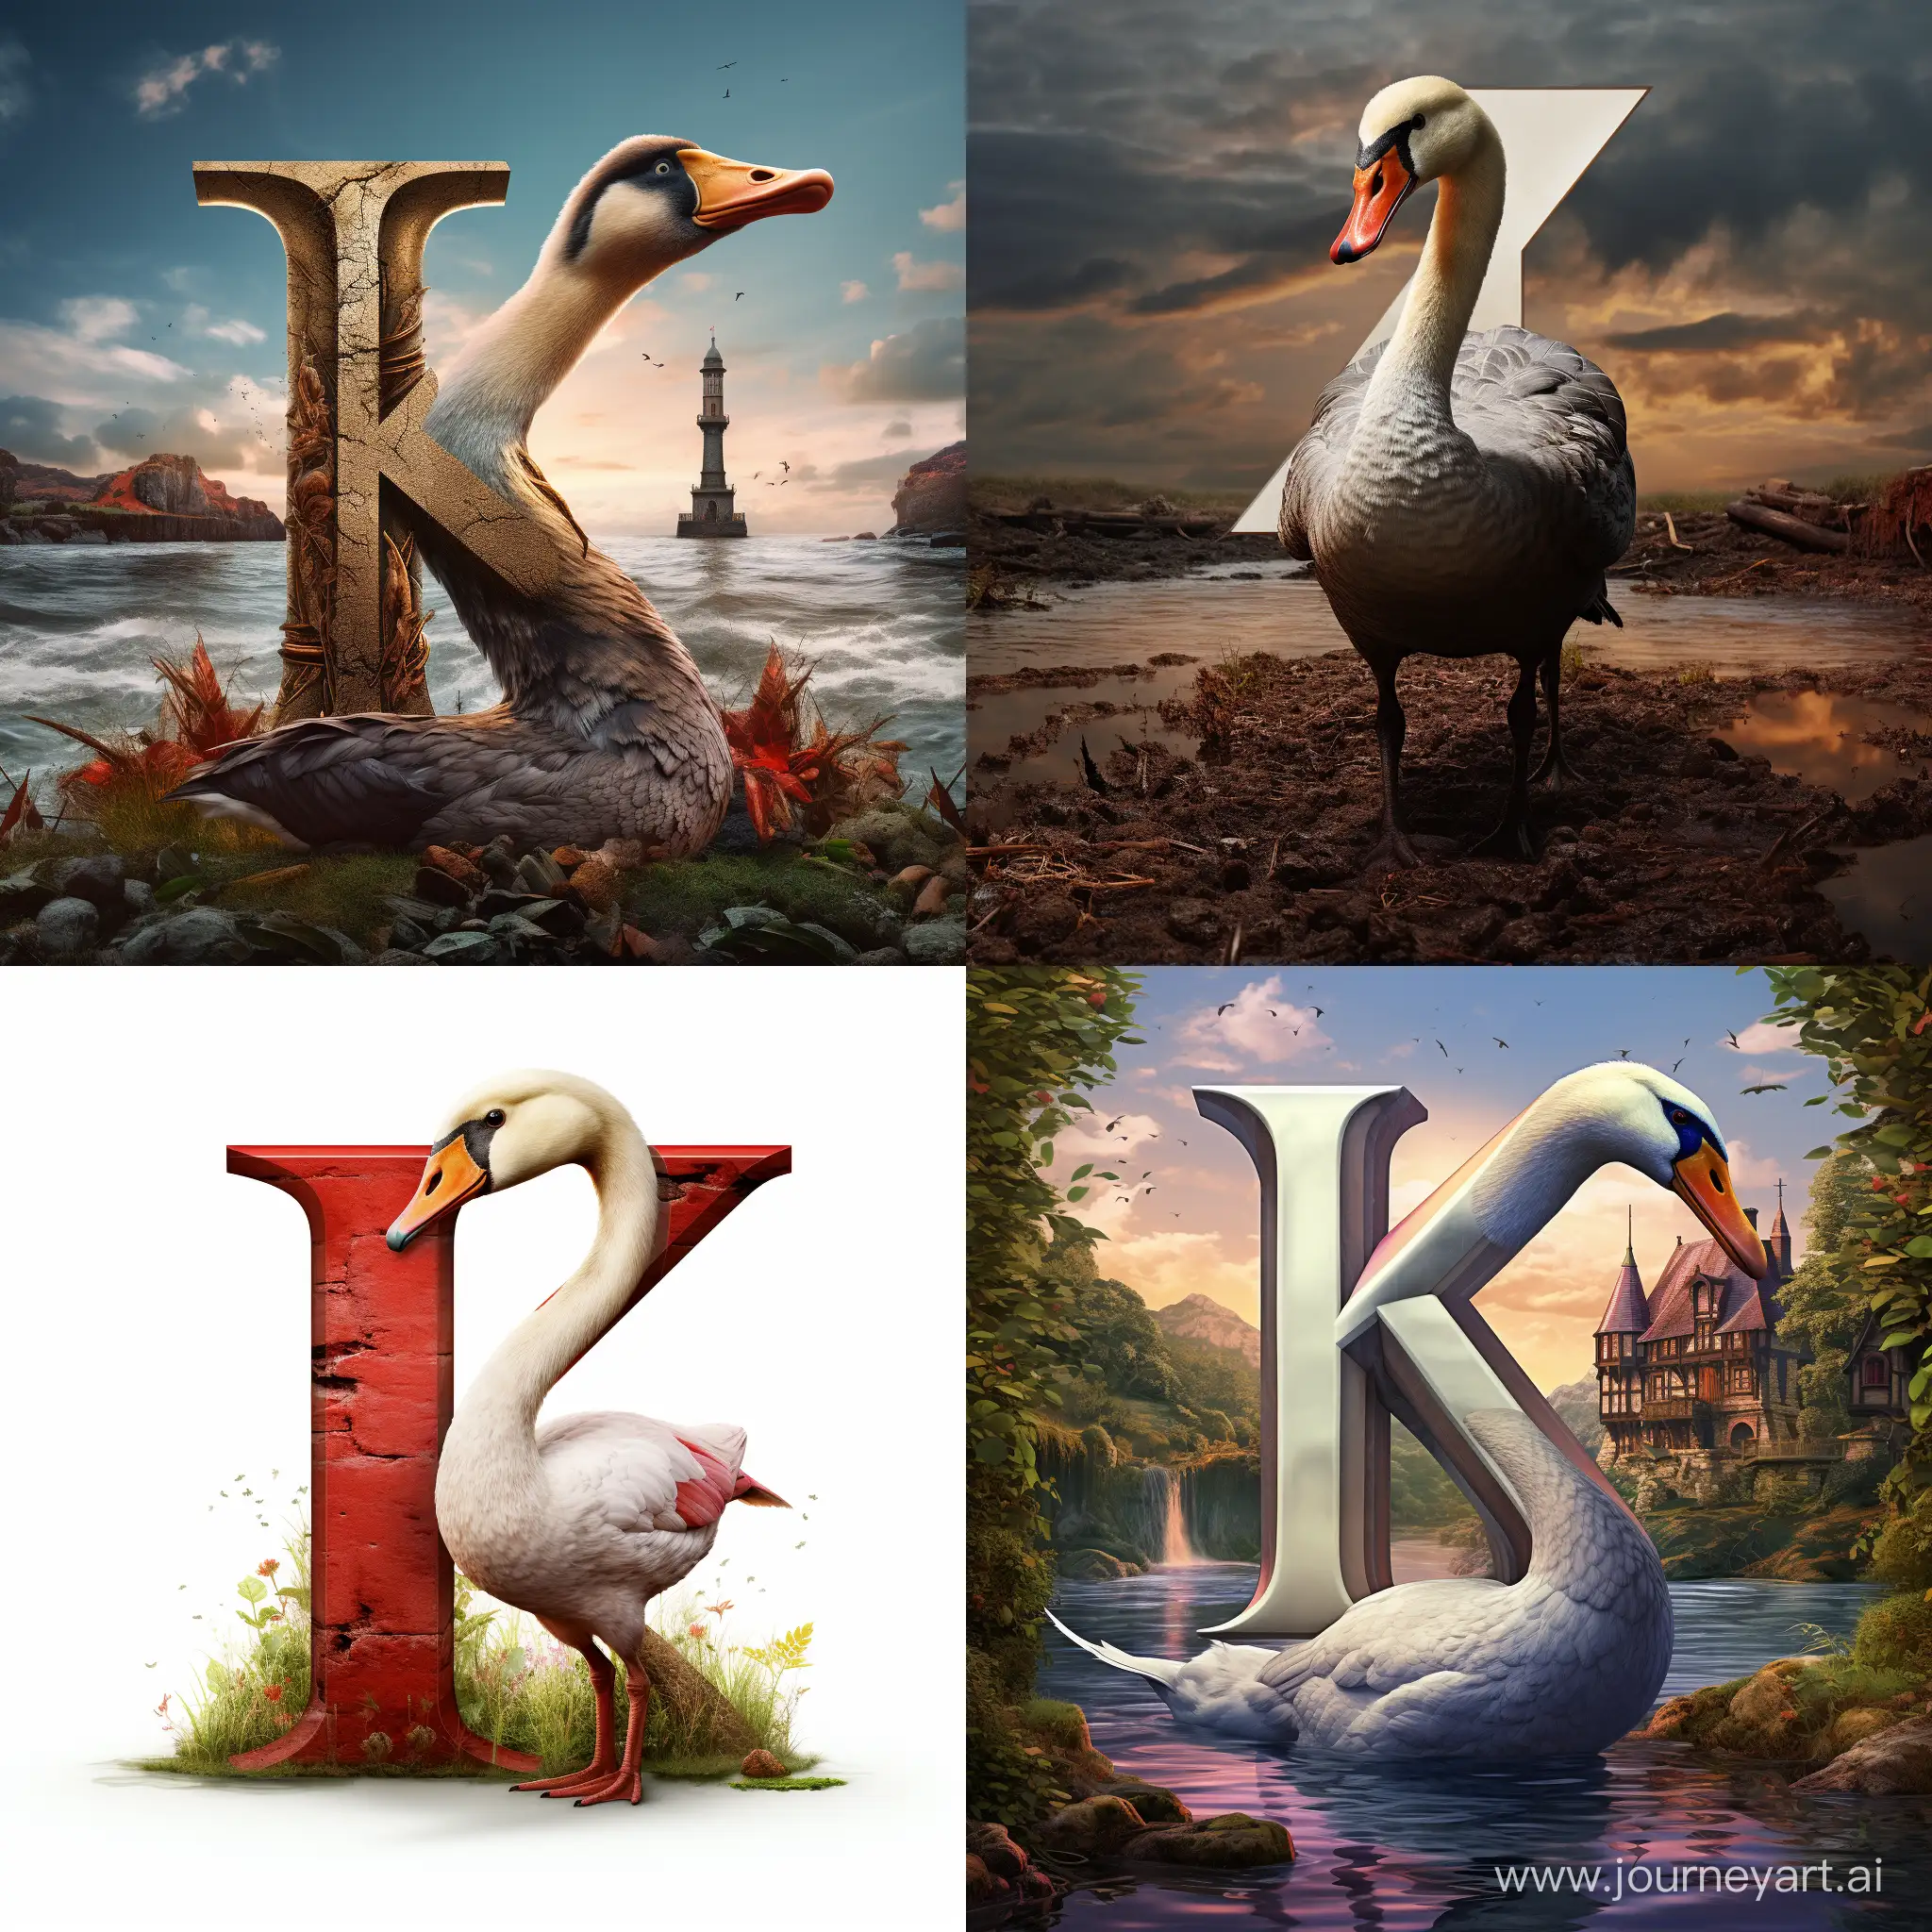 Goose-Holding-the-Letter-K-in-a-11-Aspect-Ratio